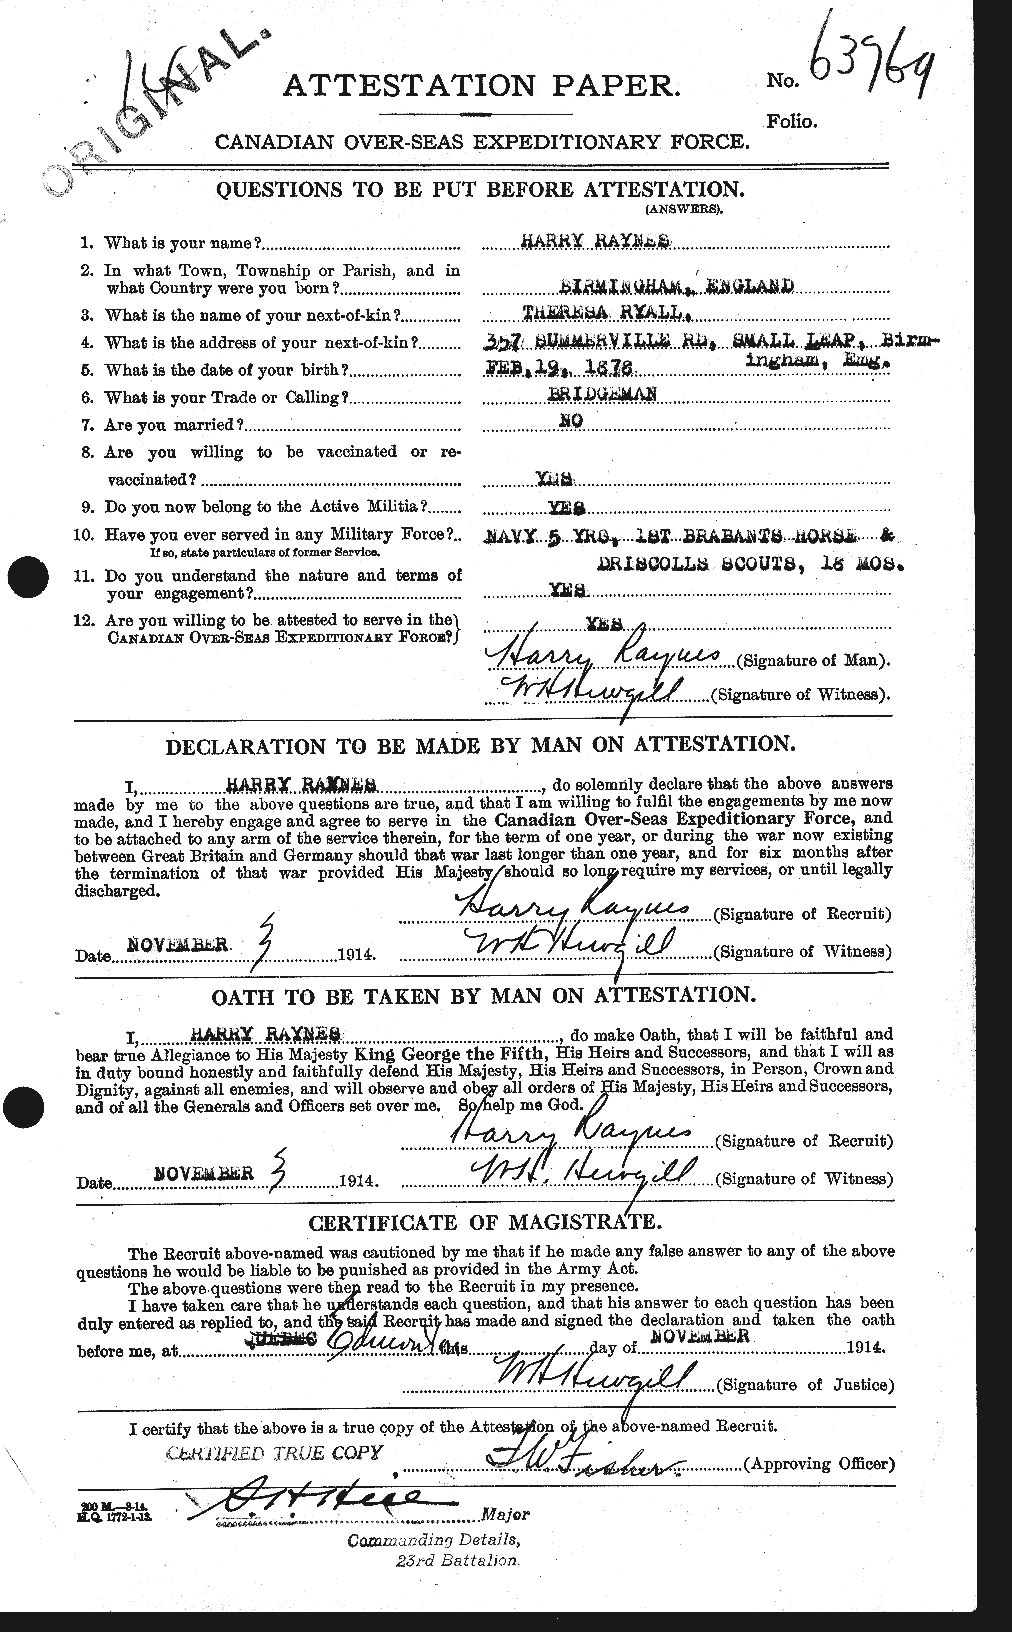 Personnel Records of the First World War - CEF 597207a